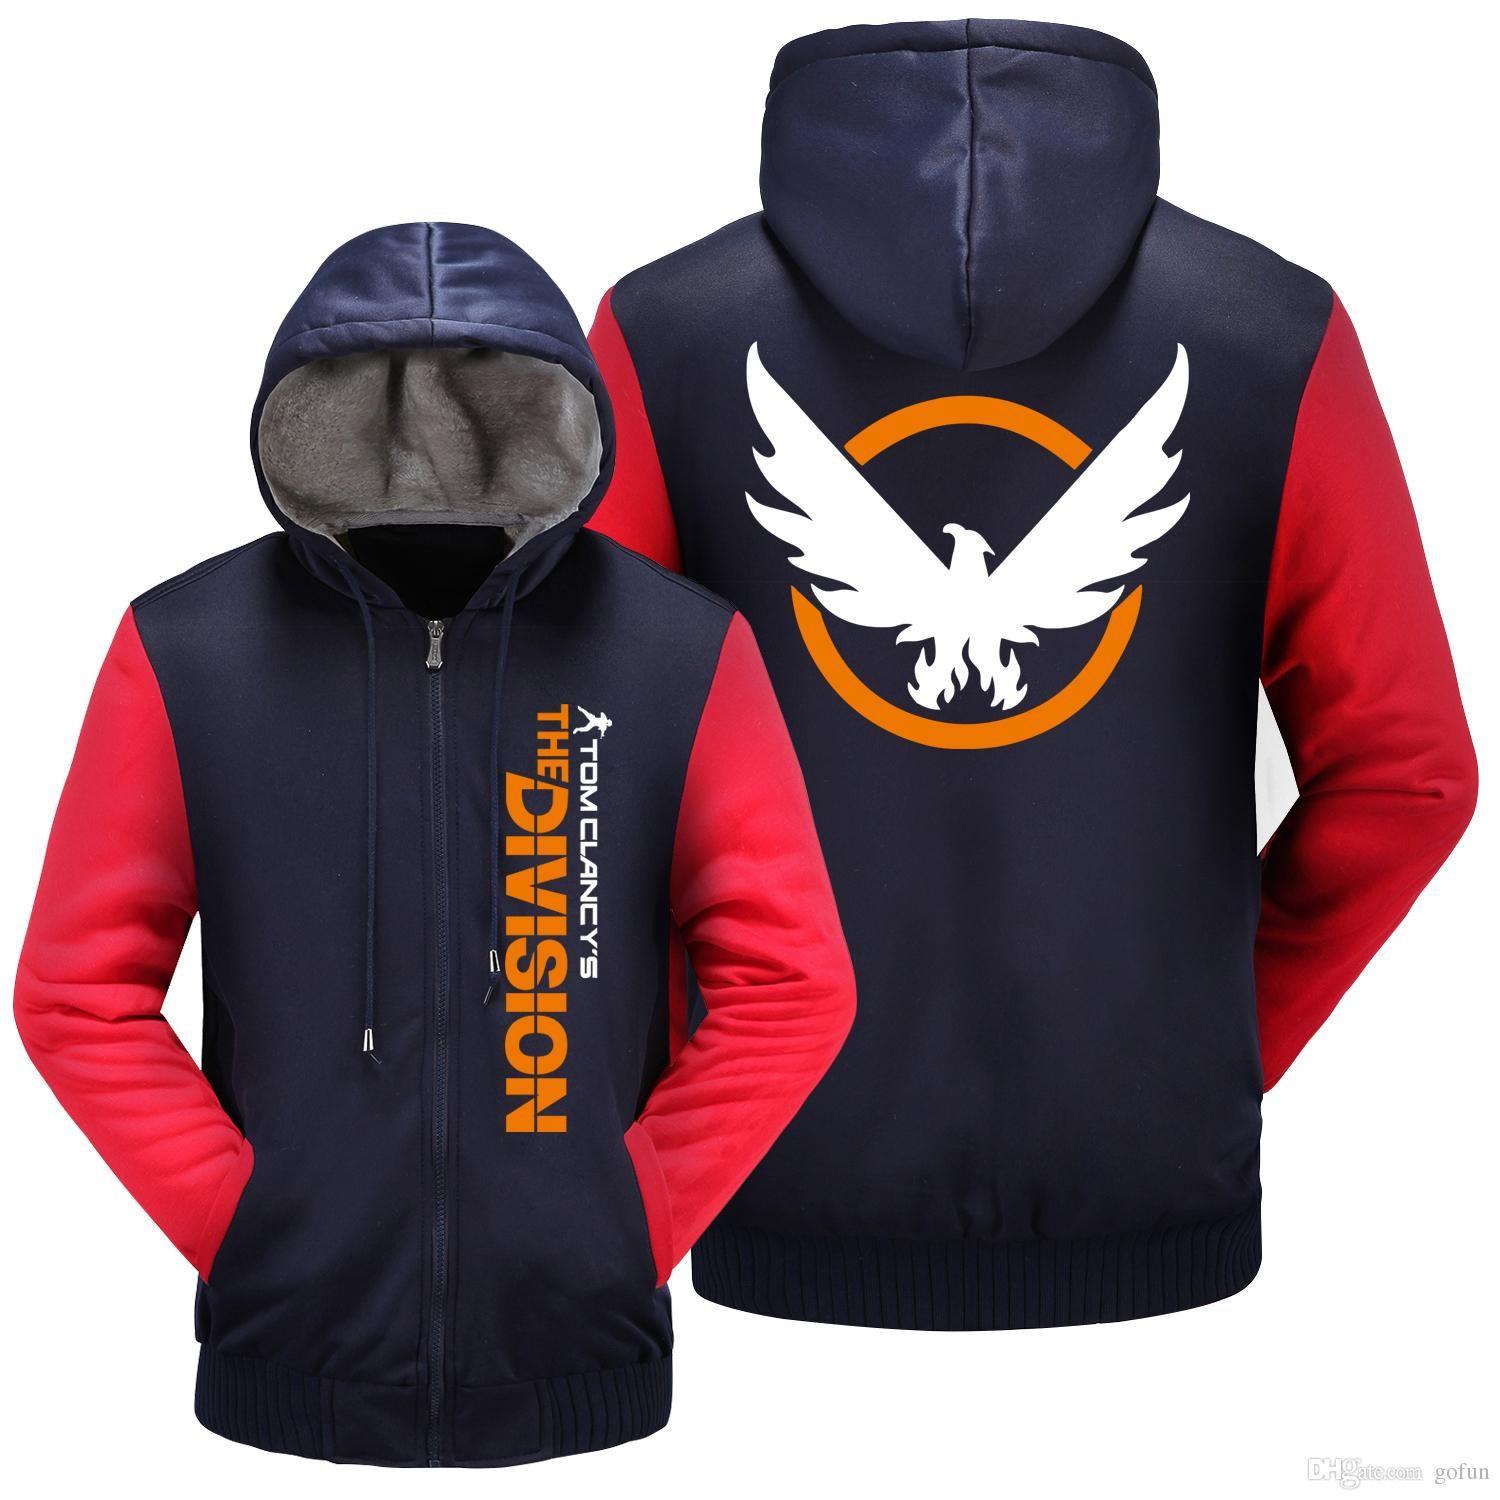 The Division Shd Logo - 2019 Game Tom Clancy'S The Division SHD Logo Hoodies Zip Up Printing ...